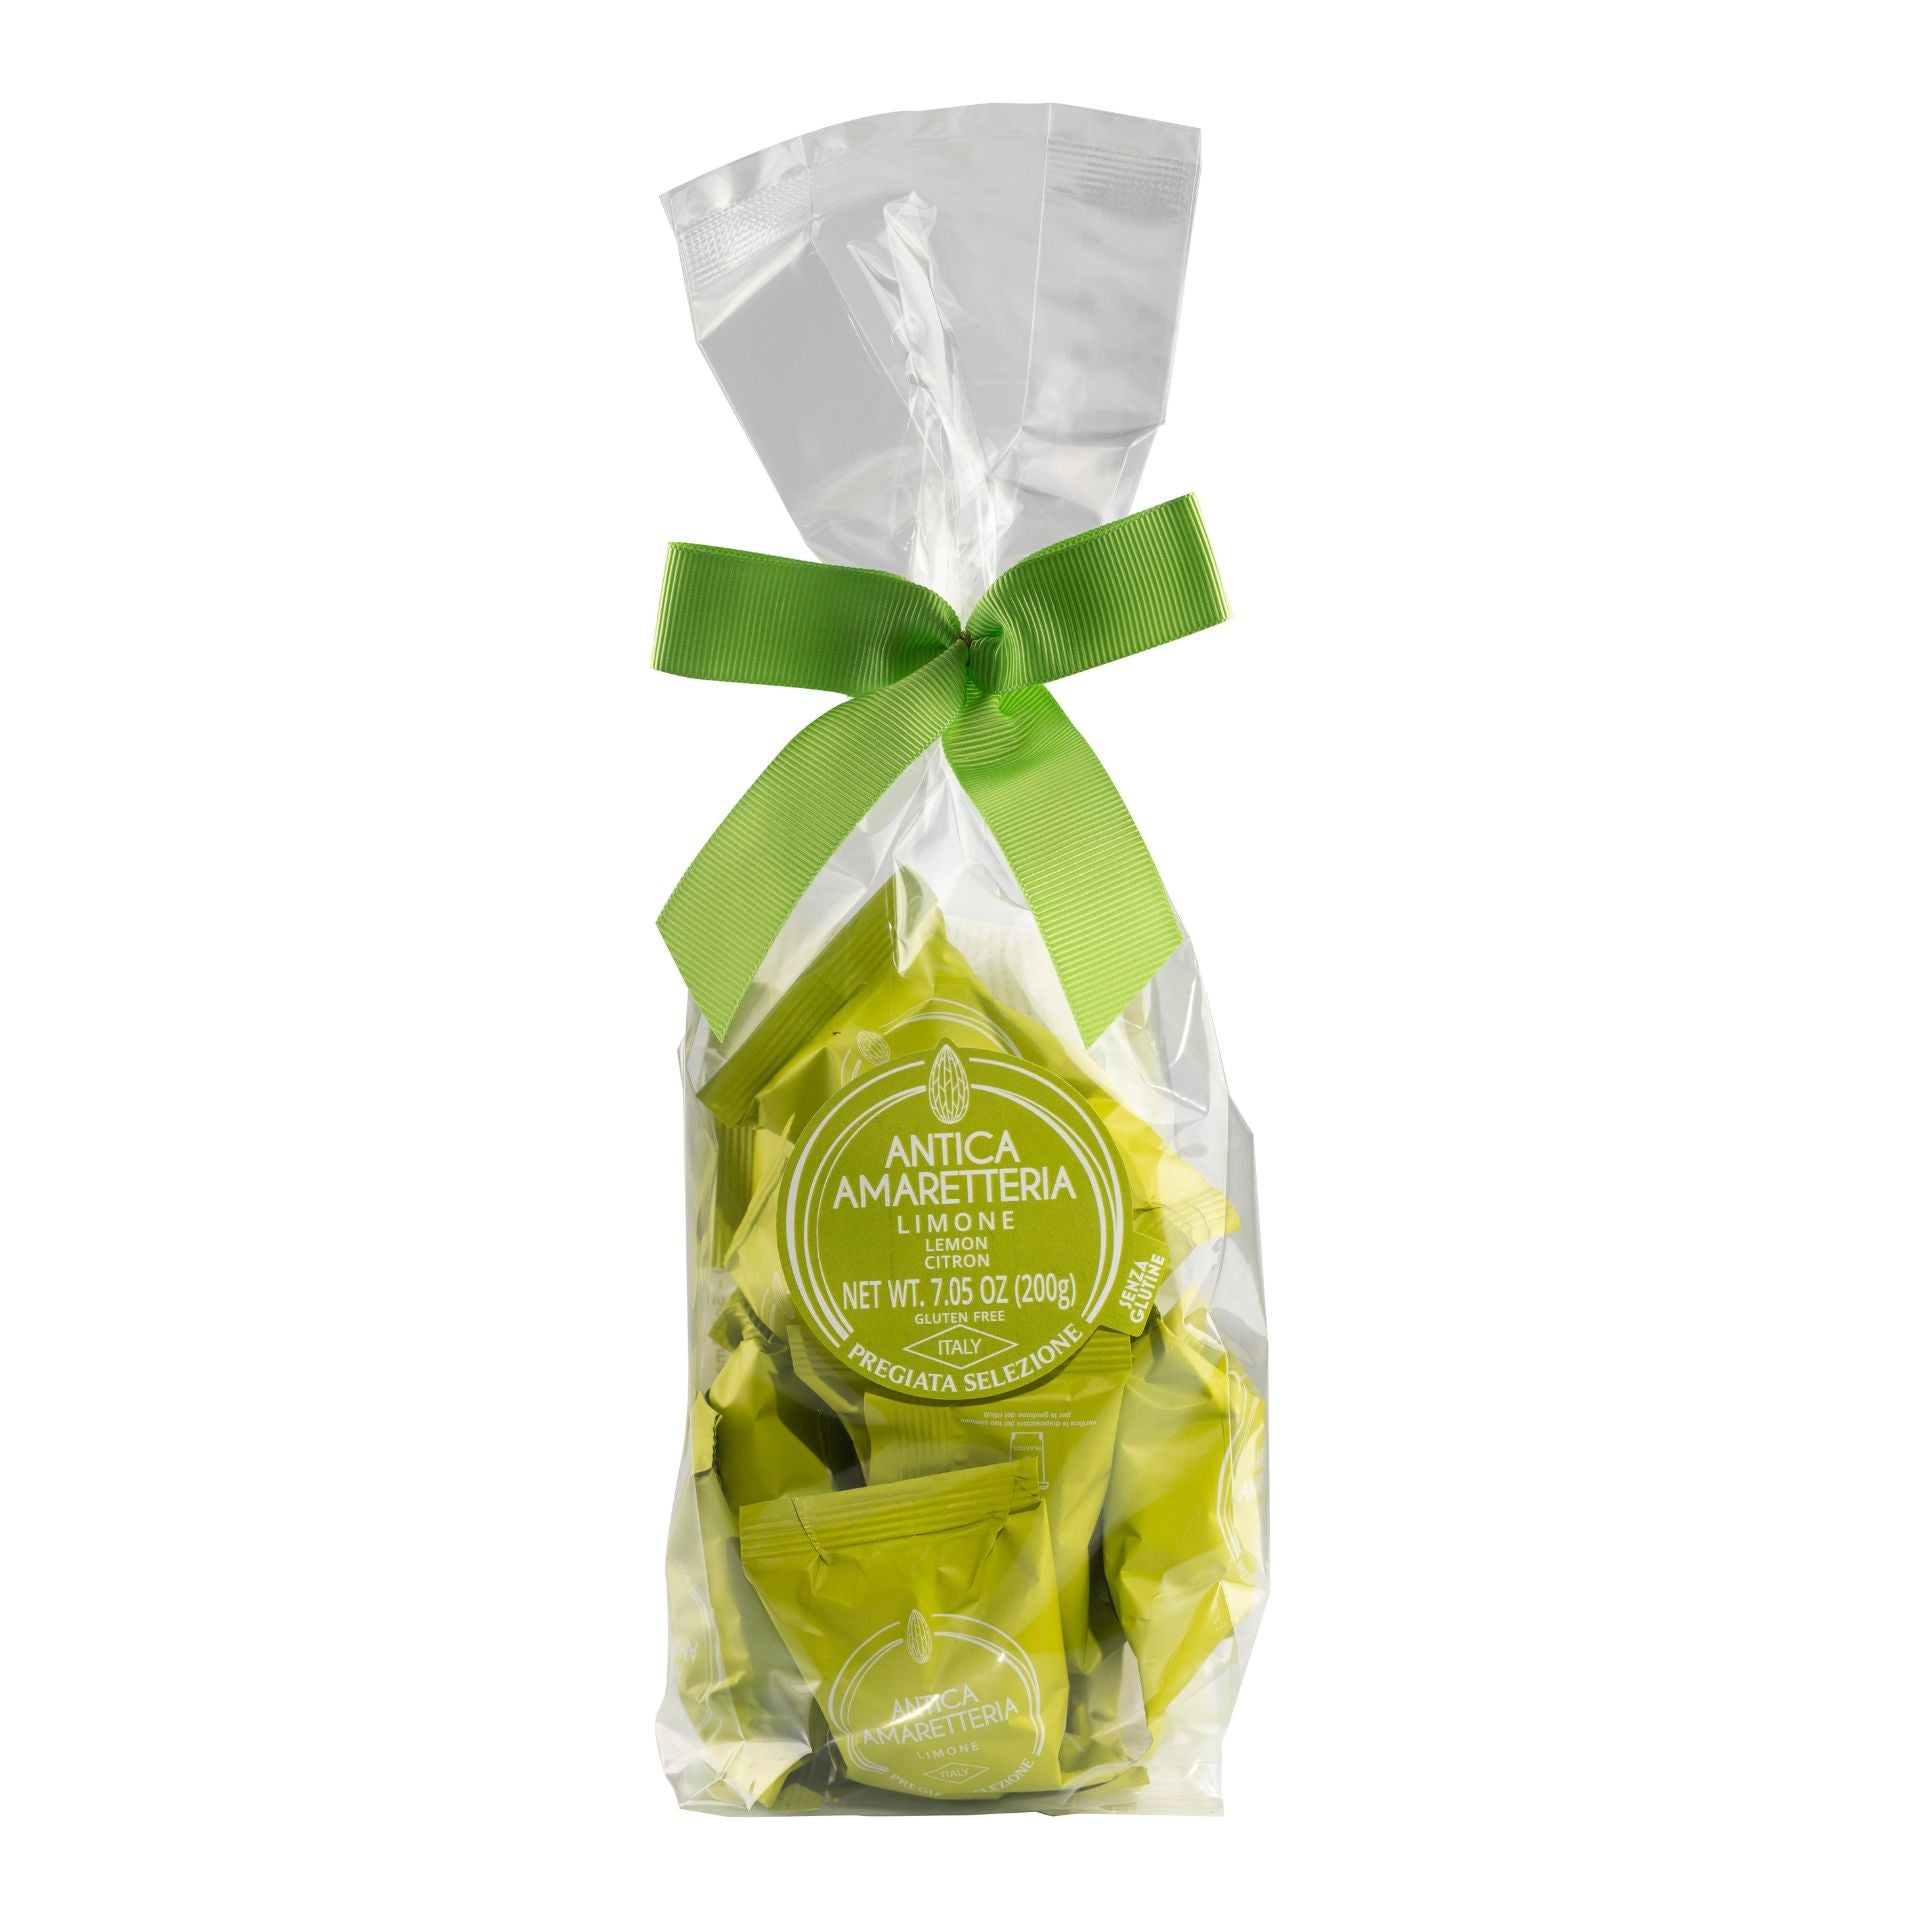 Antica Amaretteria Soft Lemon Amaretti 200g (Bag)  | Imported and distributed in the UK by Just Gourmet Foods